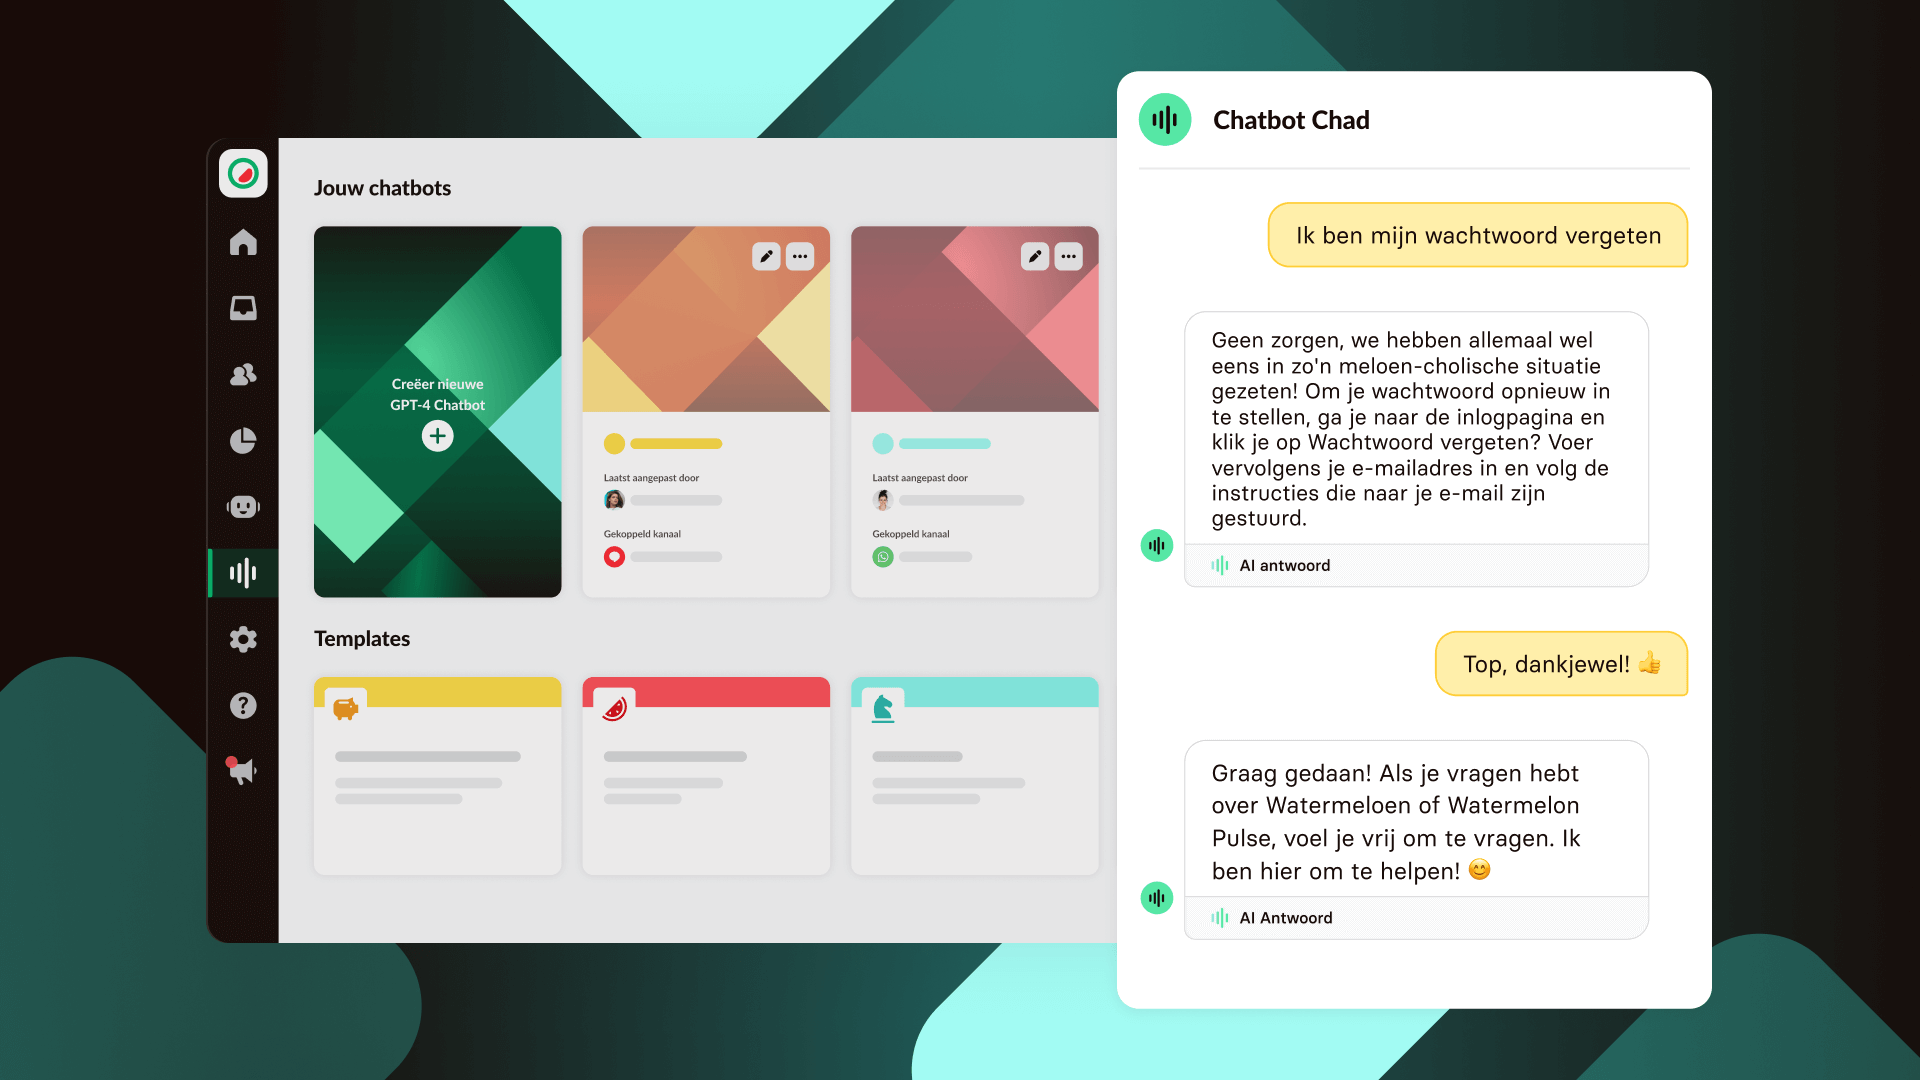 Live chat with AI Chatbot by Watermelon AI